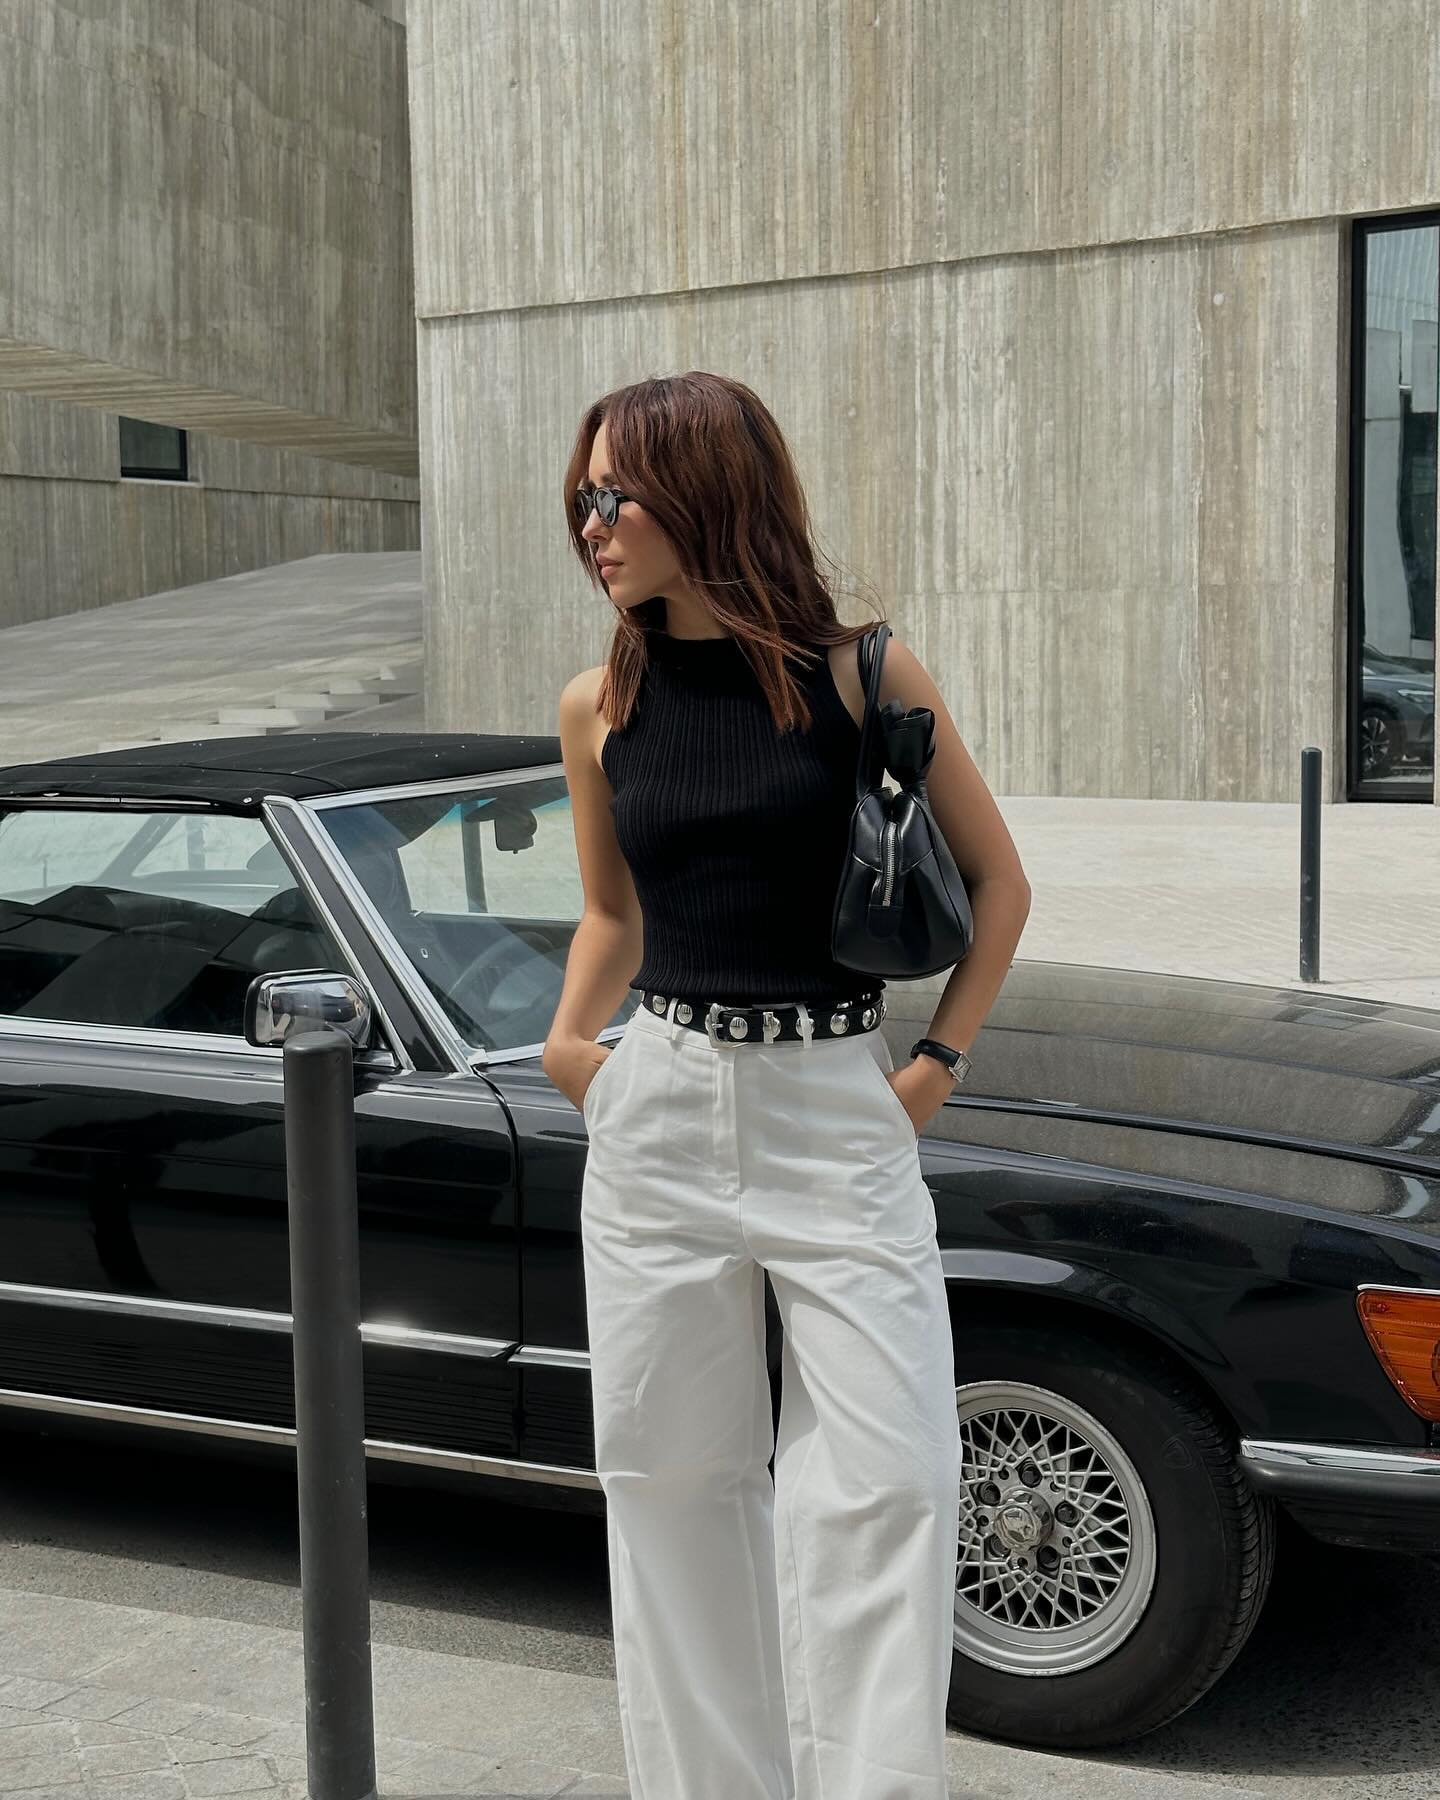 fashion influencer Debora Rosa poses in front of a vintage black convertible car wearing black sunglasses, a. black high-neck tank top, a black shoulder bag, a studded Khaite belt, and white casual pants